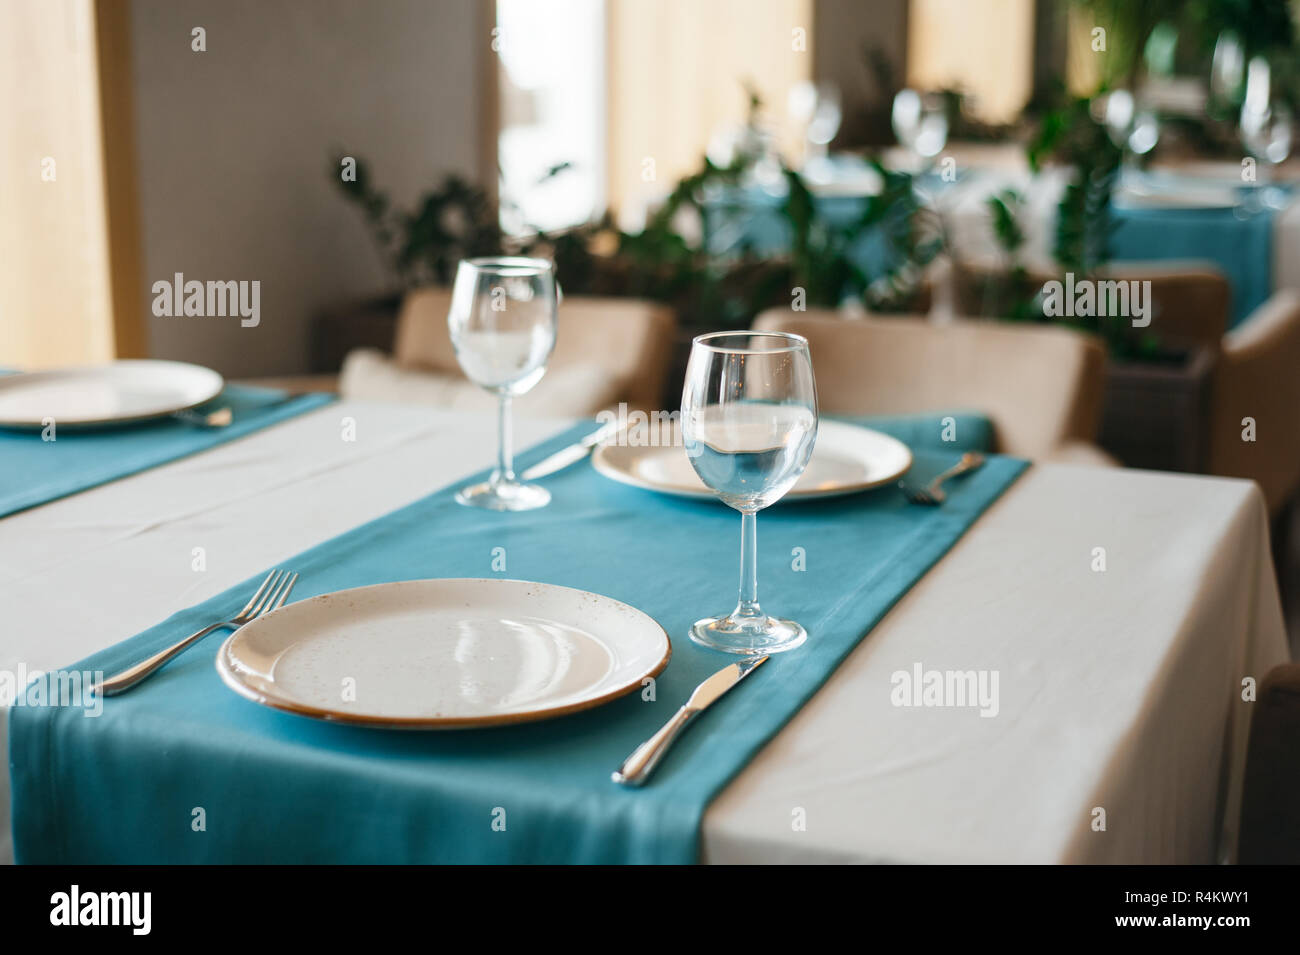 Restaurant Table Setting For Two Persons Date Concept Stock Photo Alamy